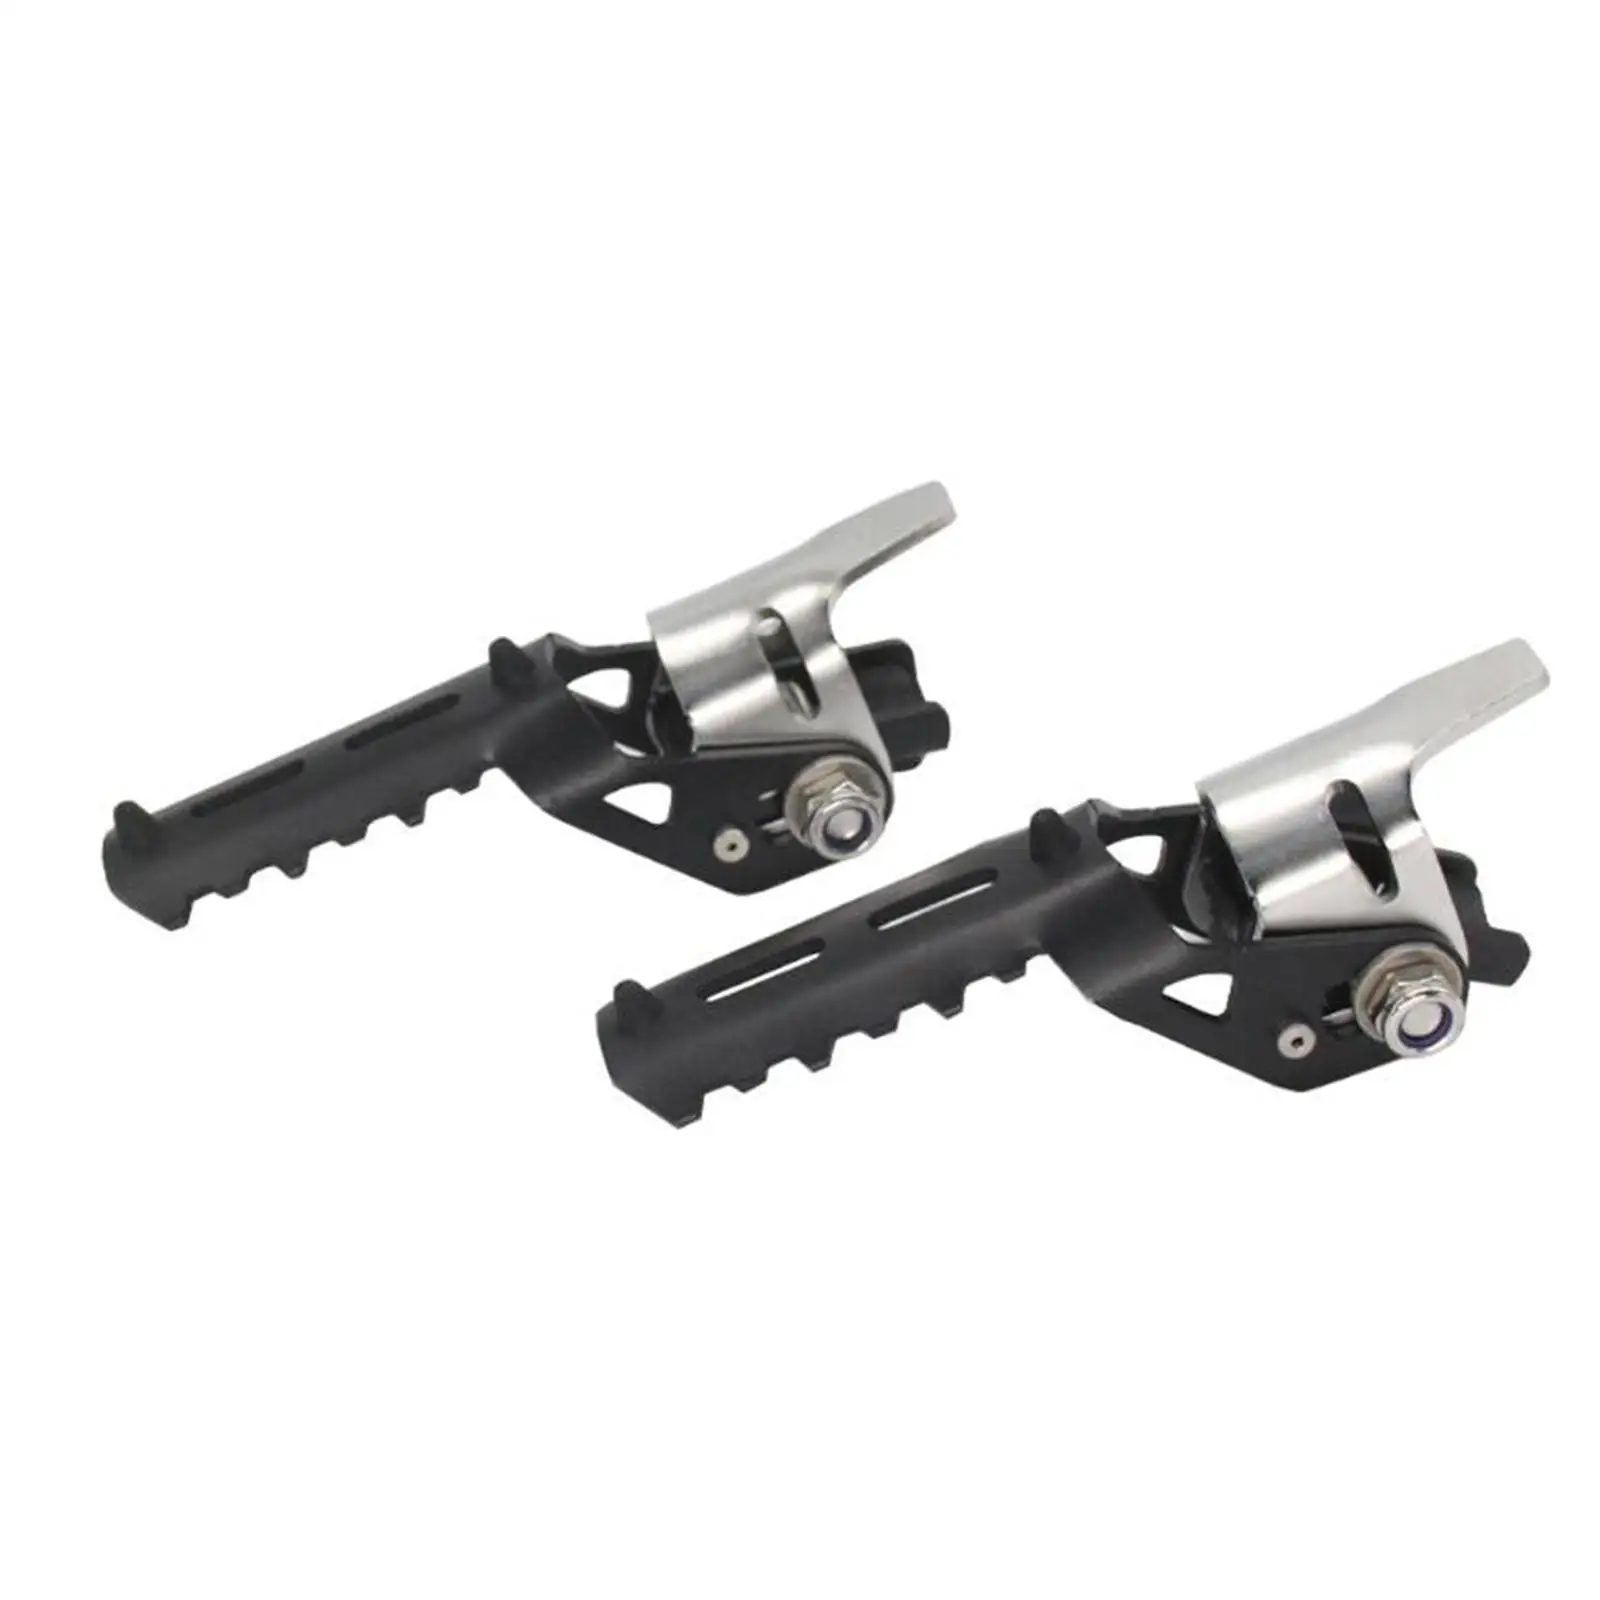 Motorbike Front Foot Pegs Folding Footrests Clamps 22-25mm for  R1250GS R 1250 GS  F850GS C400x Replace Parts